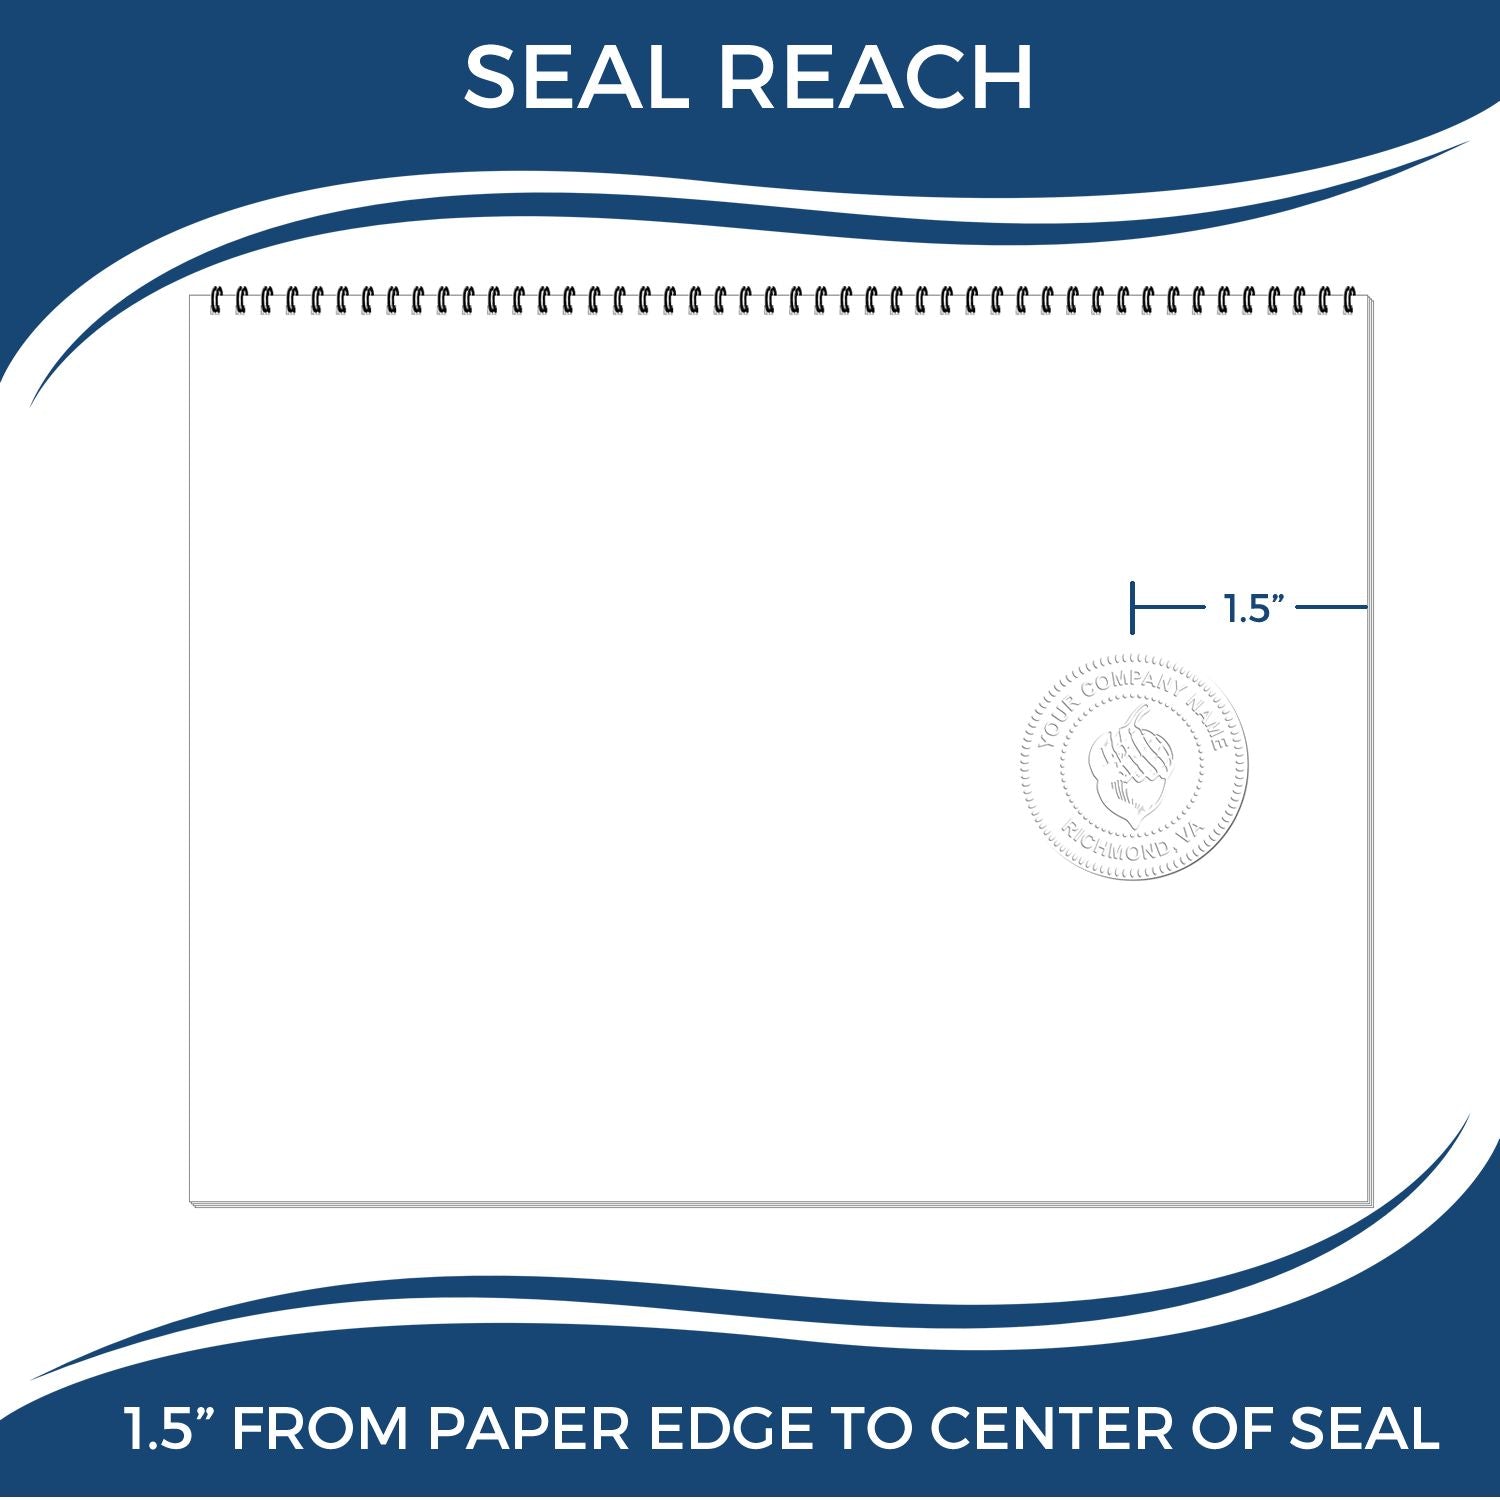 An infographic showing the seal reach which is represented by a ruler and a miniature seal image of the Soft Oregon Professional Engineer Seal